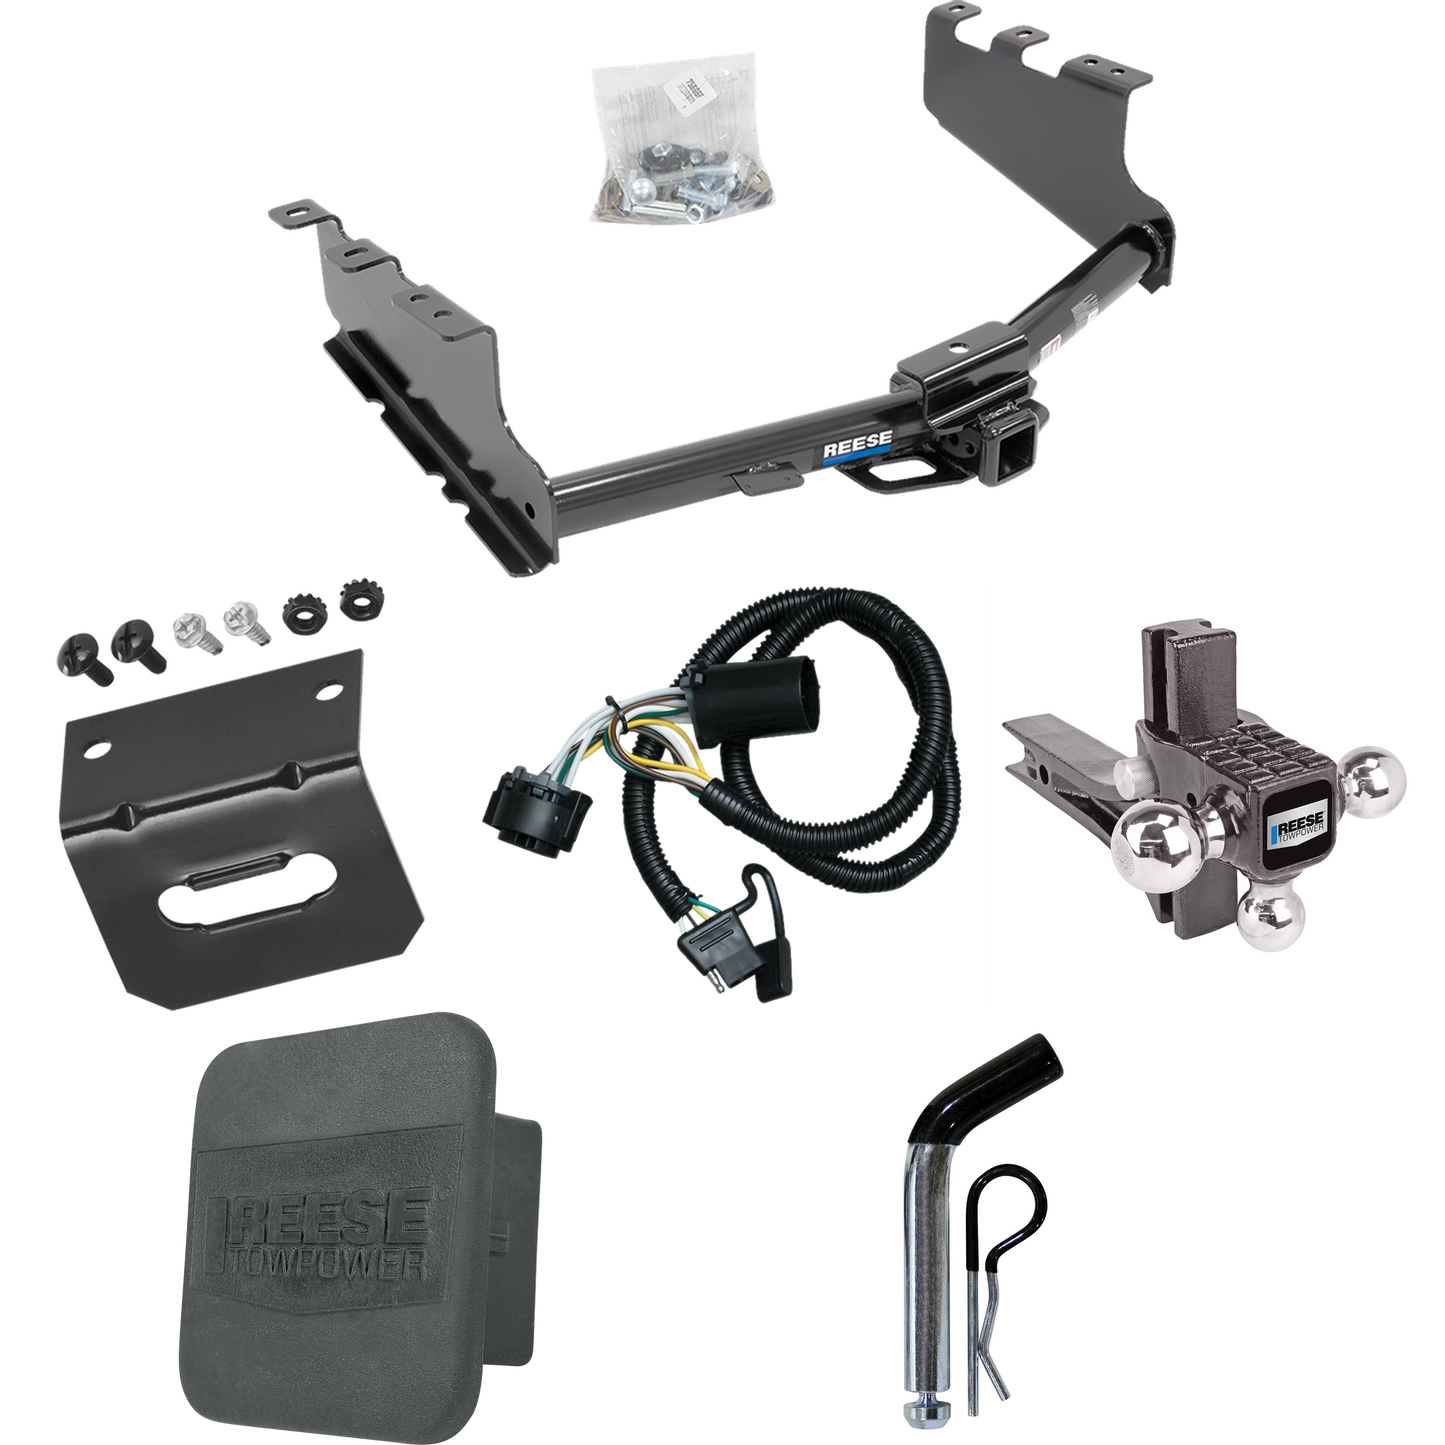 Fits 2014-2018 Chevrolet Silverado 1500 Trailer Hitch Tow PKG w/ 4-Flat Wiring + Adjustable Drop Rise Triple Ball Ball Mount 1-7/8" & 2" & 2-5/16" Trailer Balls + Pin/Clip + Wiring Bracket + Hitch Cover By Reese Towpower